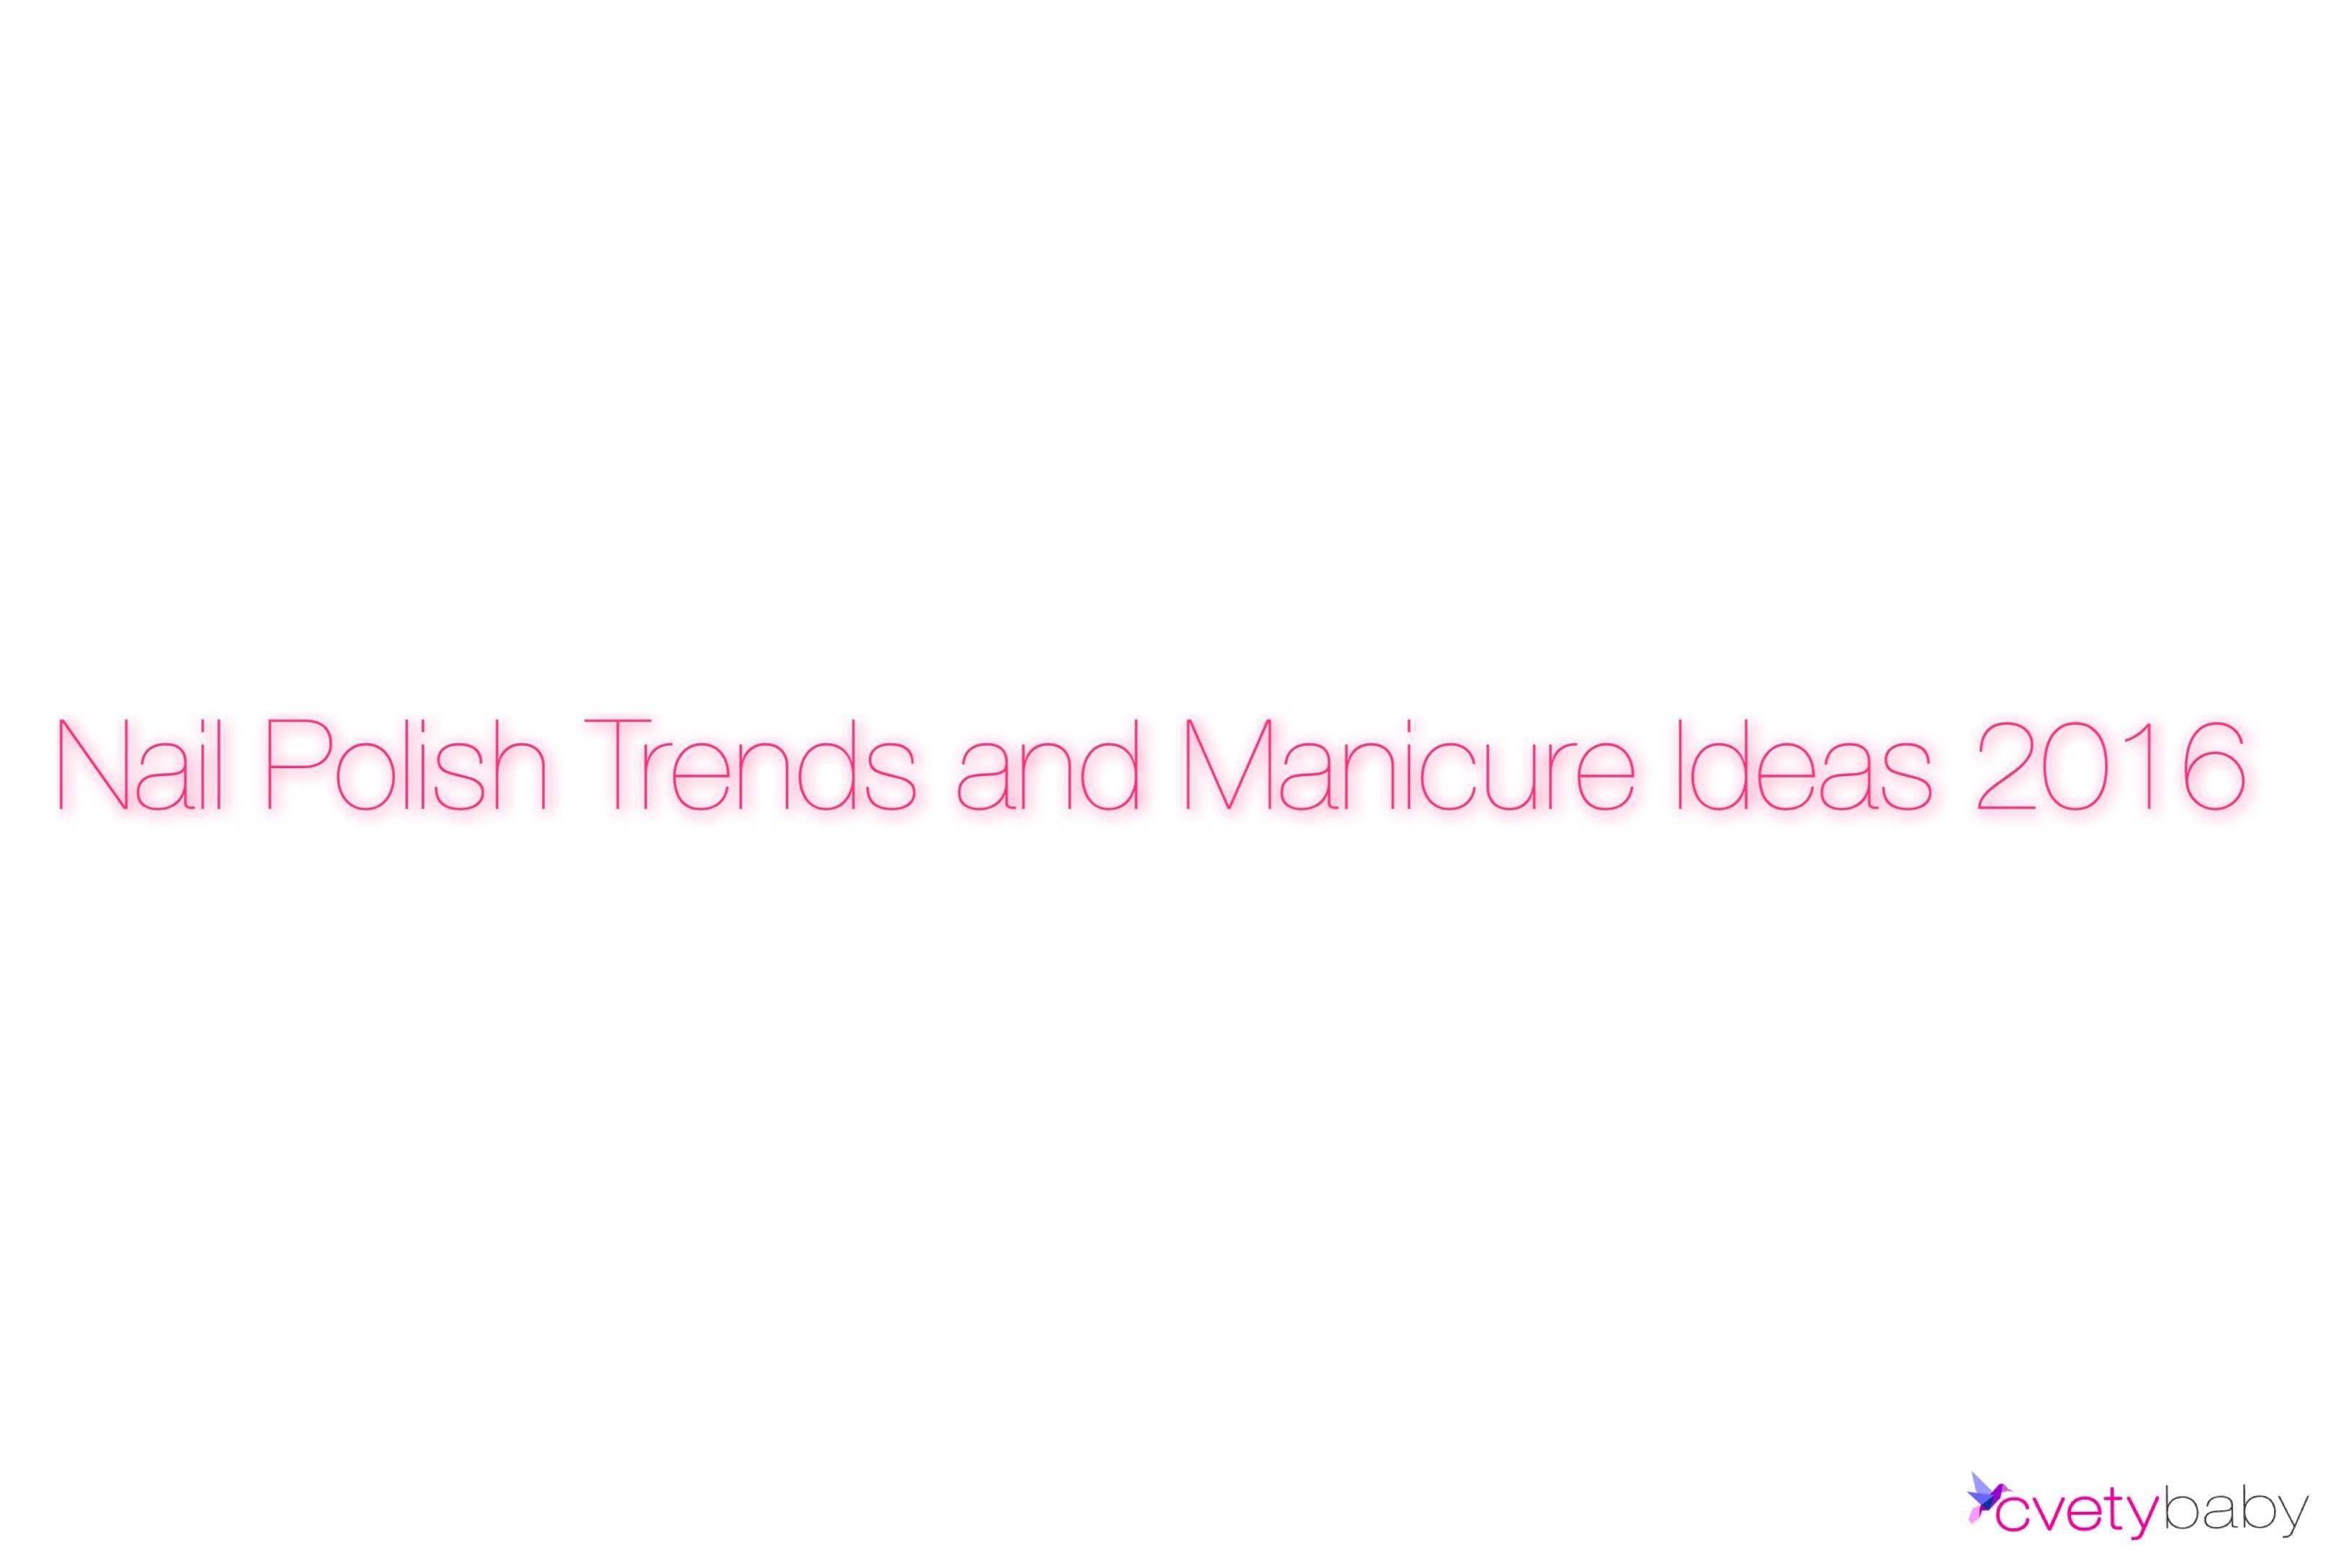 Nail polish trends 2016 and manicure ideas